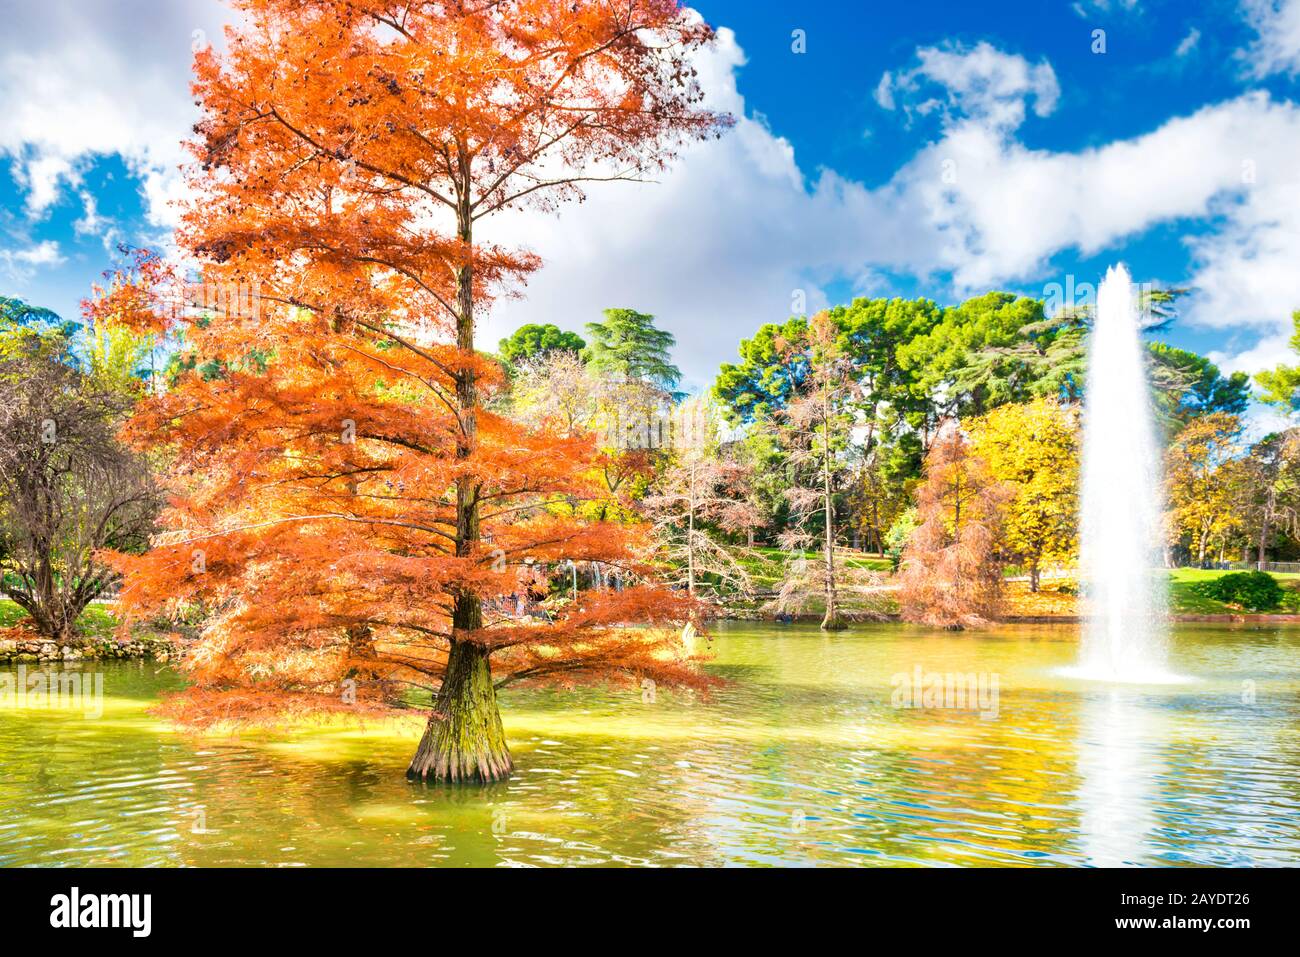 Fountain among old bald cypress trees in pond of Madrid park Stock Photo